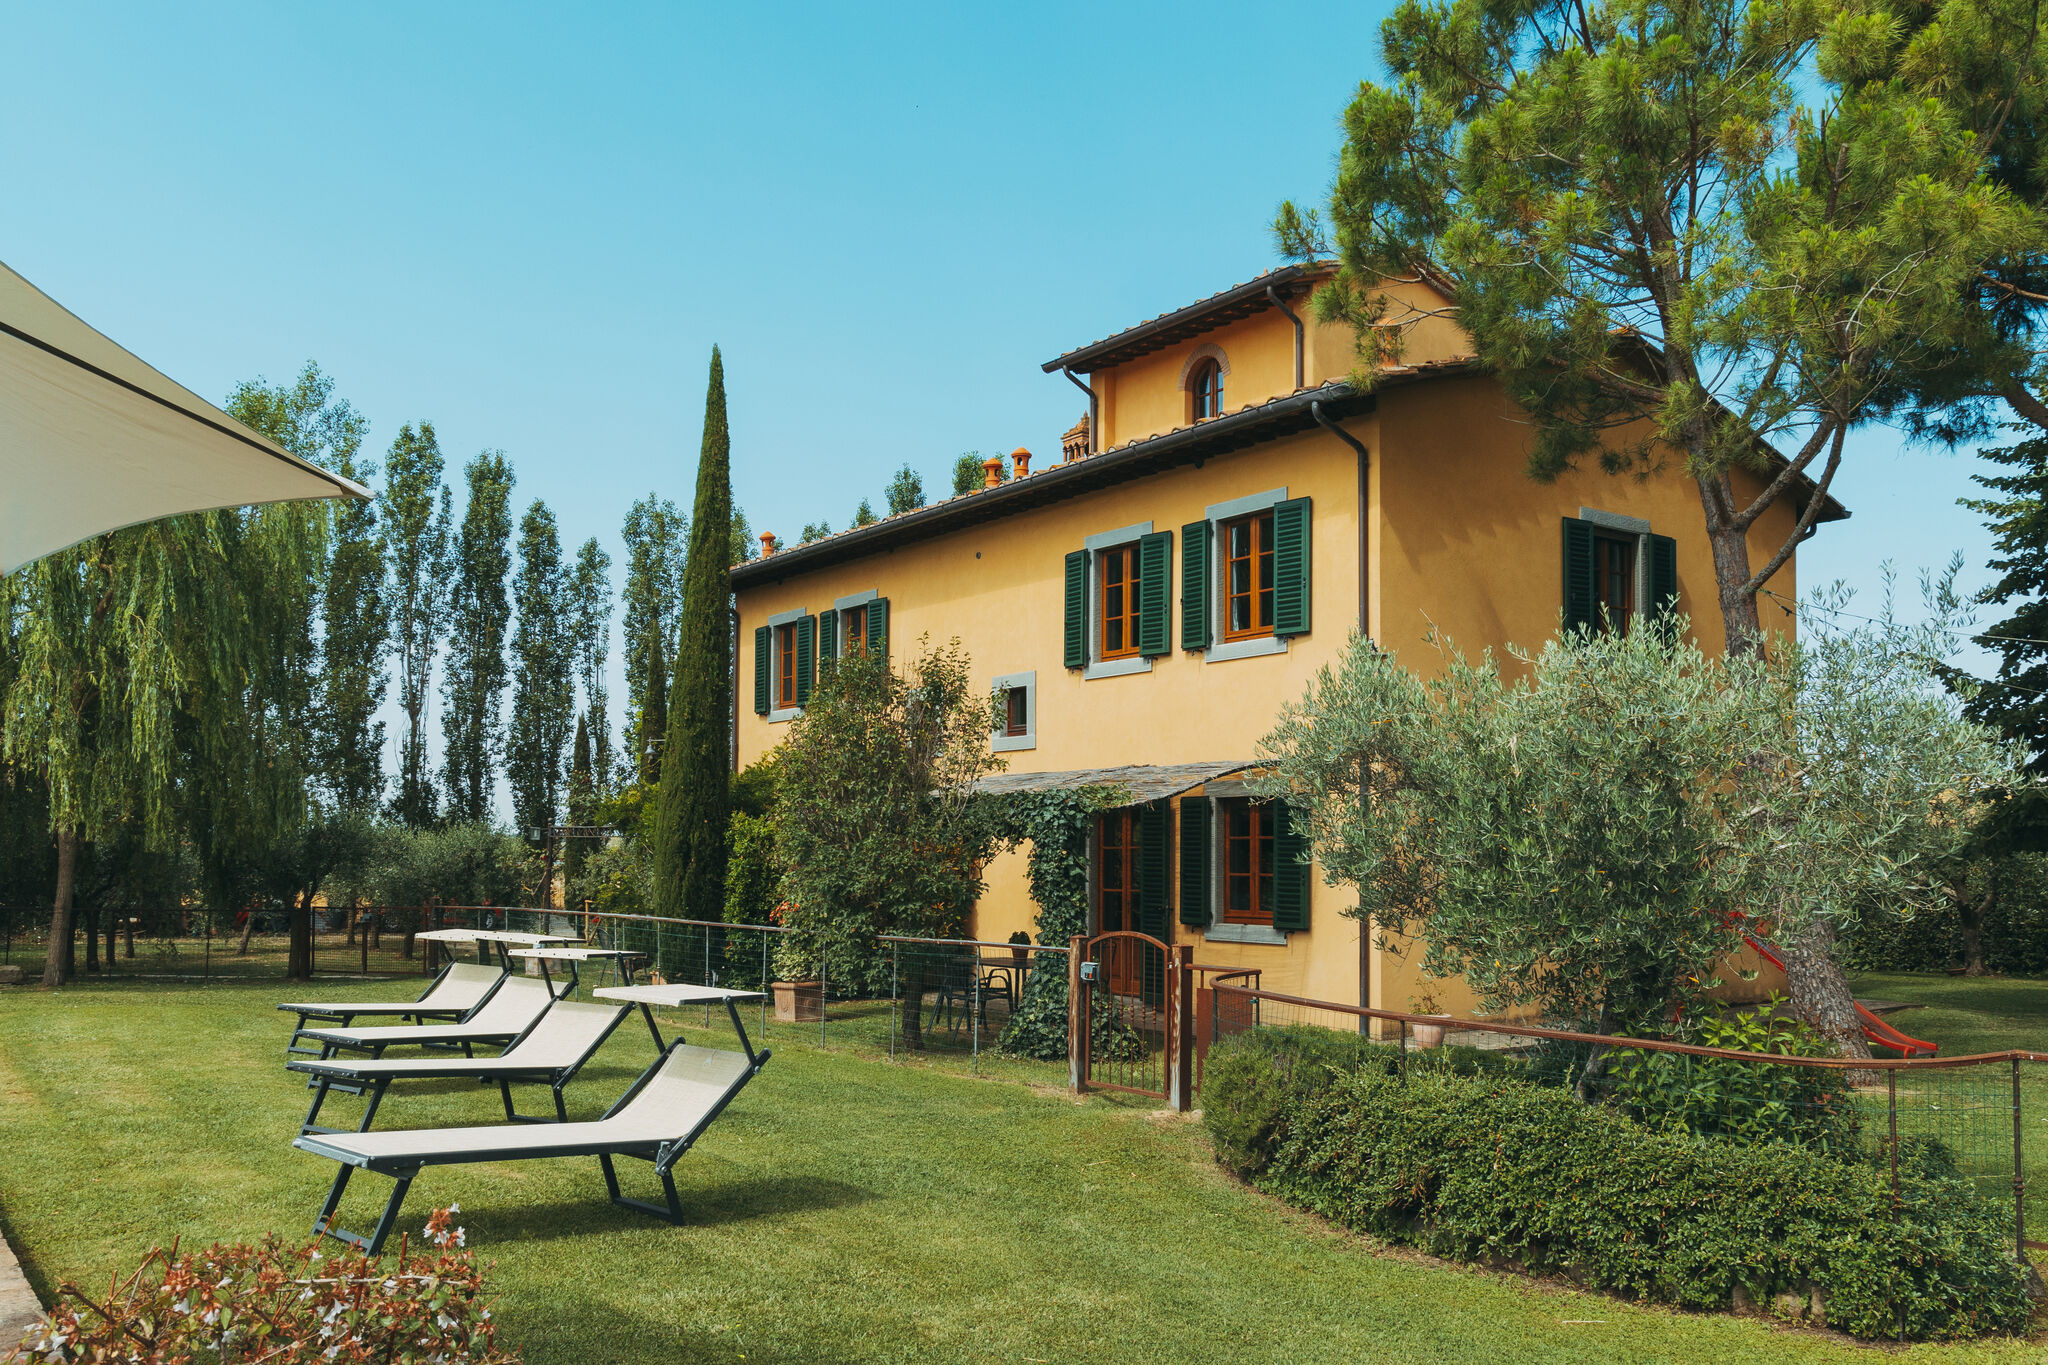 Farmhouse with private terrace, garden and pool, overlooking the town of Cortona